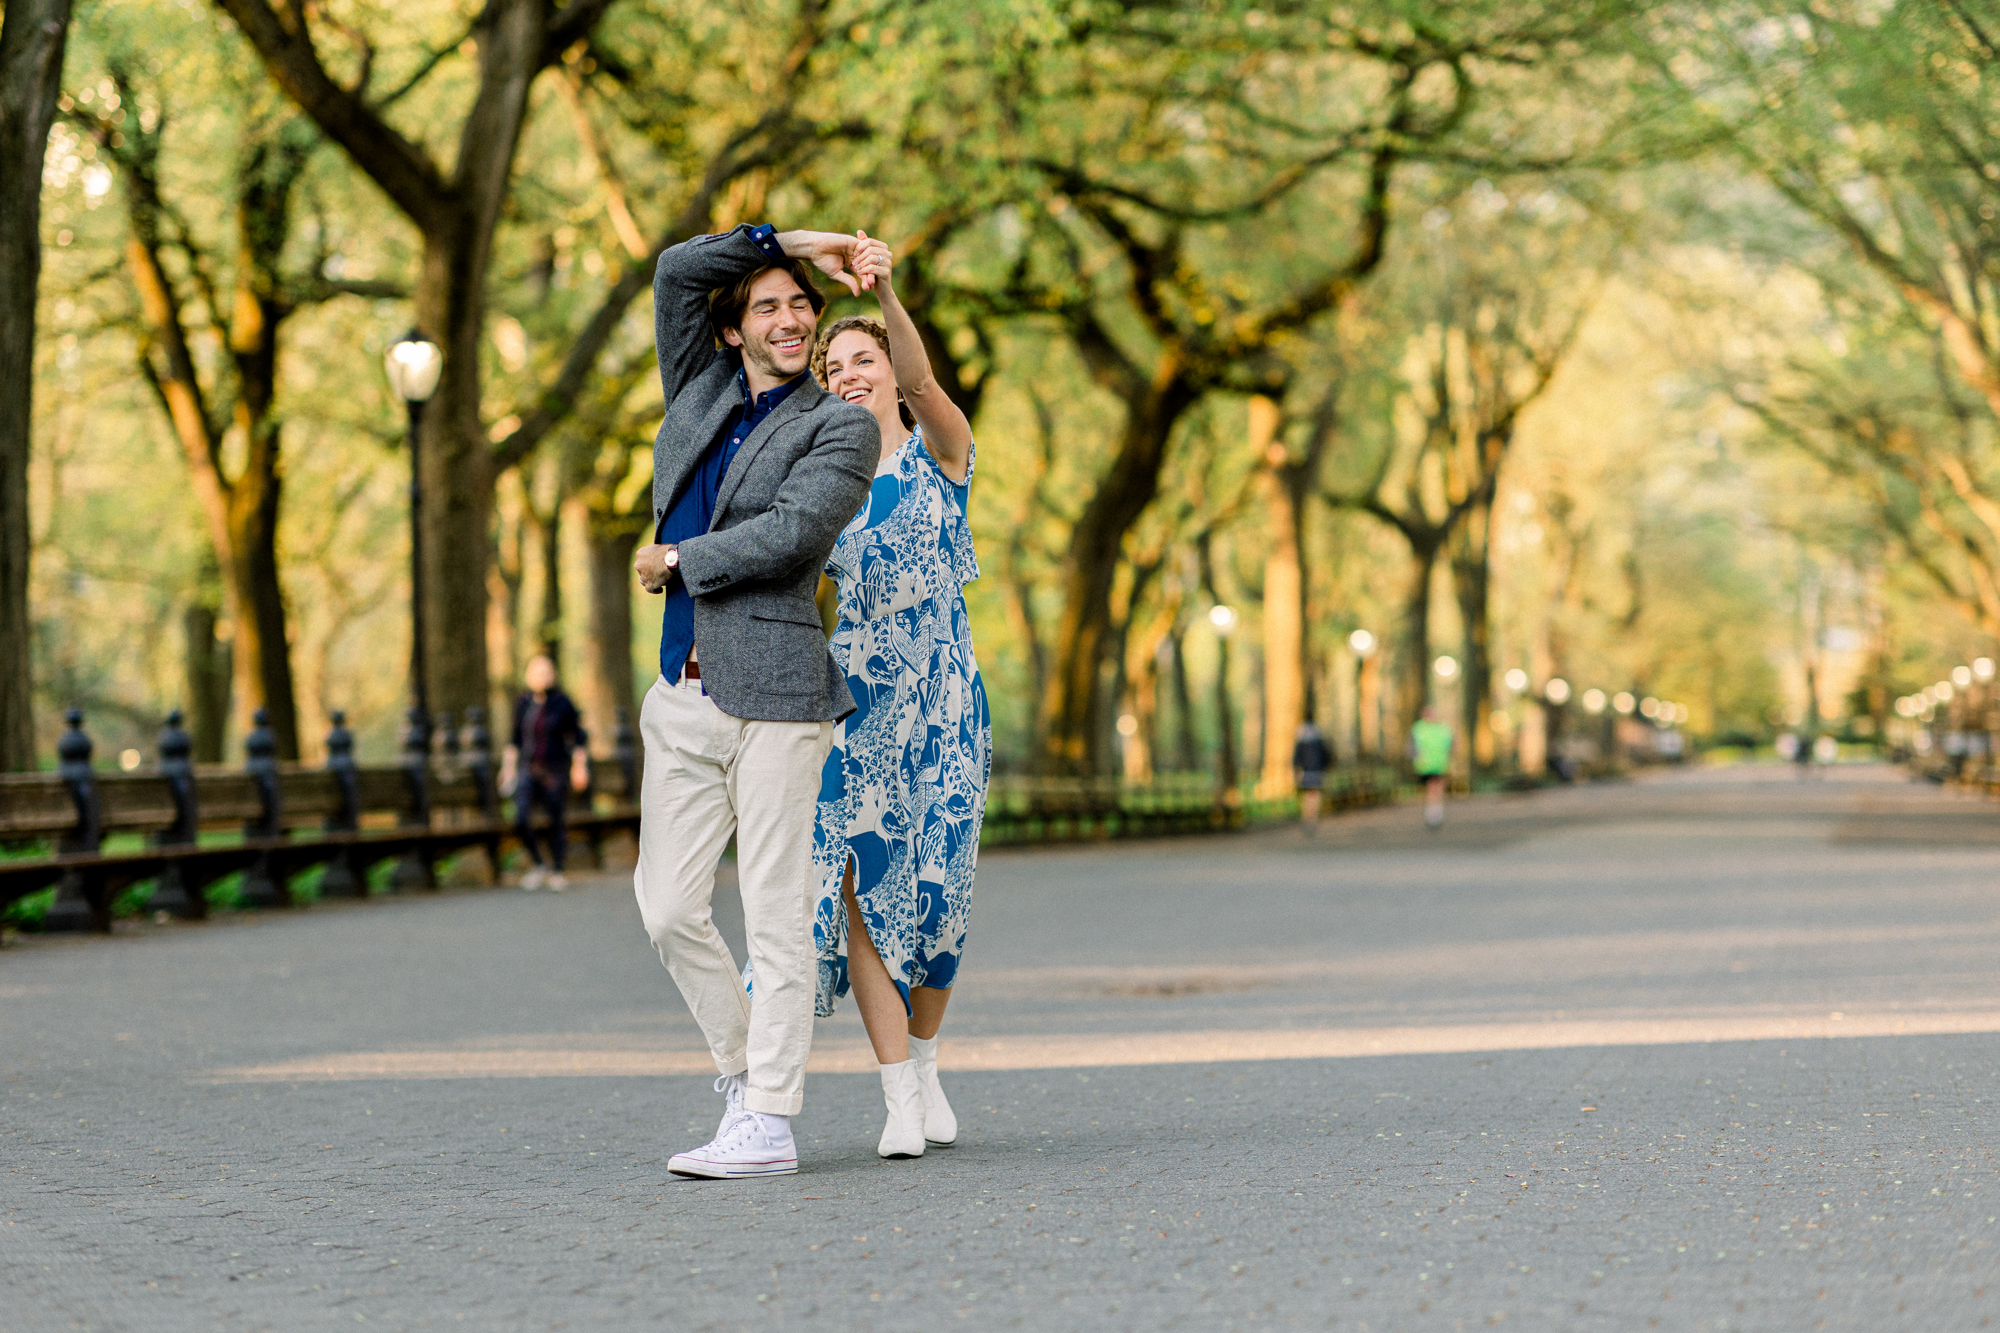 Terrific Pose Ideas for your Engagement Session